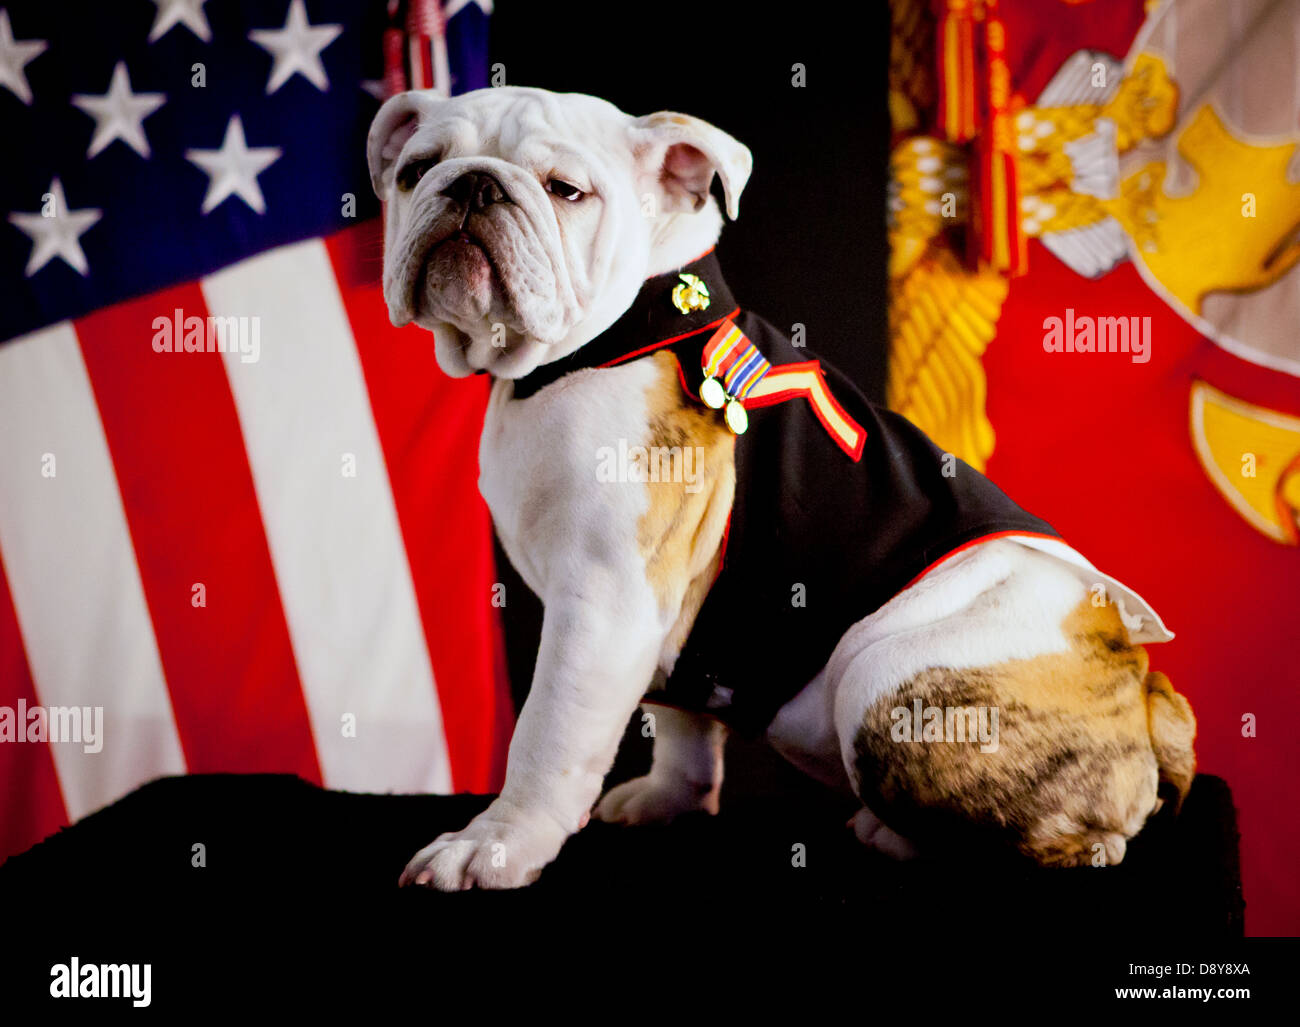 The official mascot of the US Marine Corps, English bulldog Pfc. Chesty the XIV, poses for his official photo May 15, 2013 in the Pentagon, Arlington, VA . Chesty the XIV will officially take over as the mascot when his predecessor, Sgt. Chesty the XIII, retires in the fall of 2013. Stock Photo